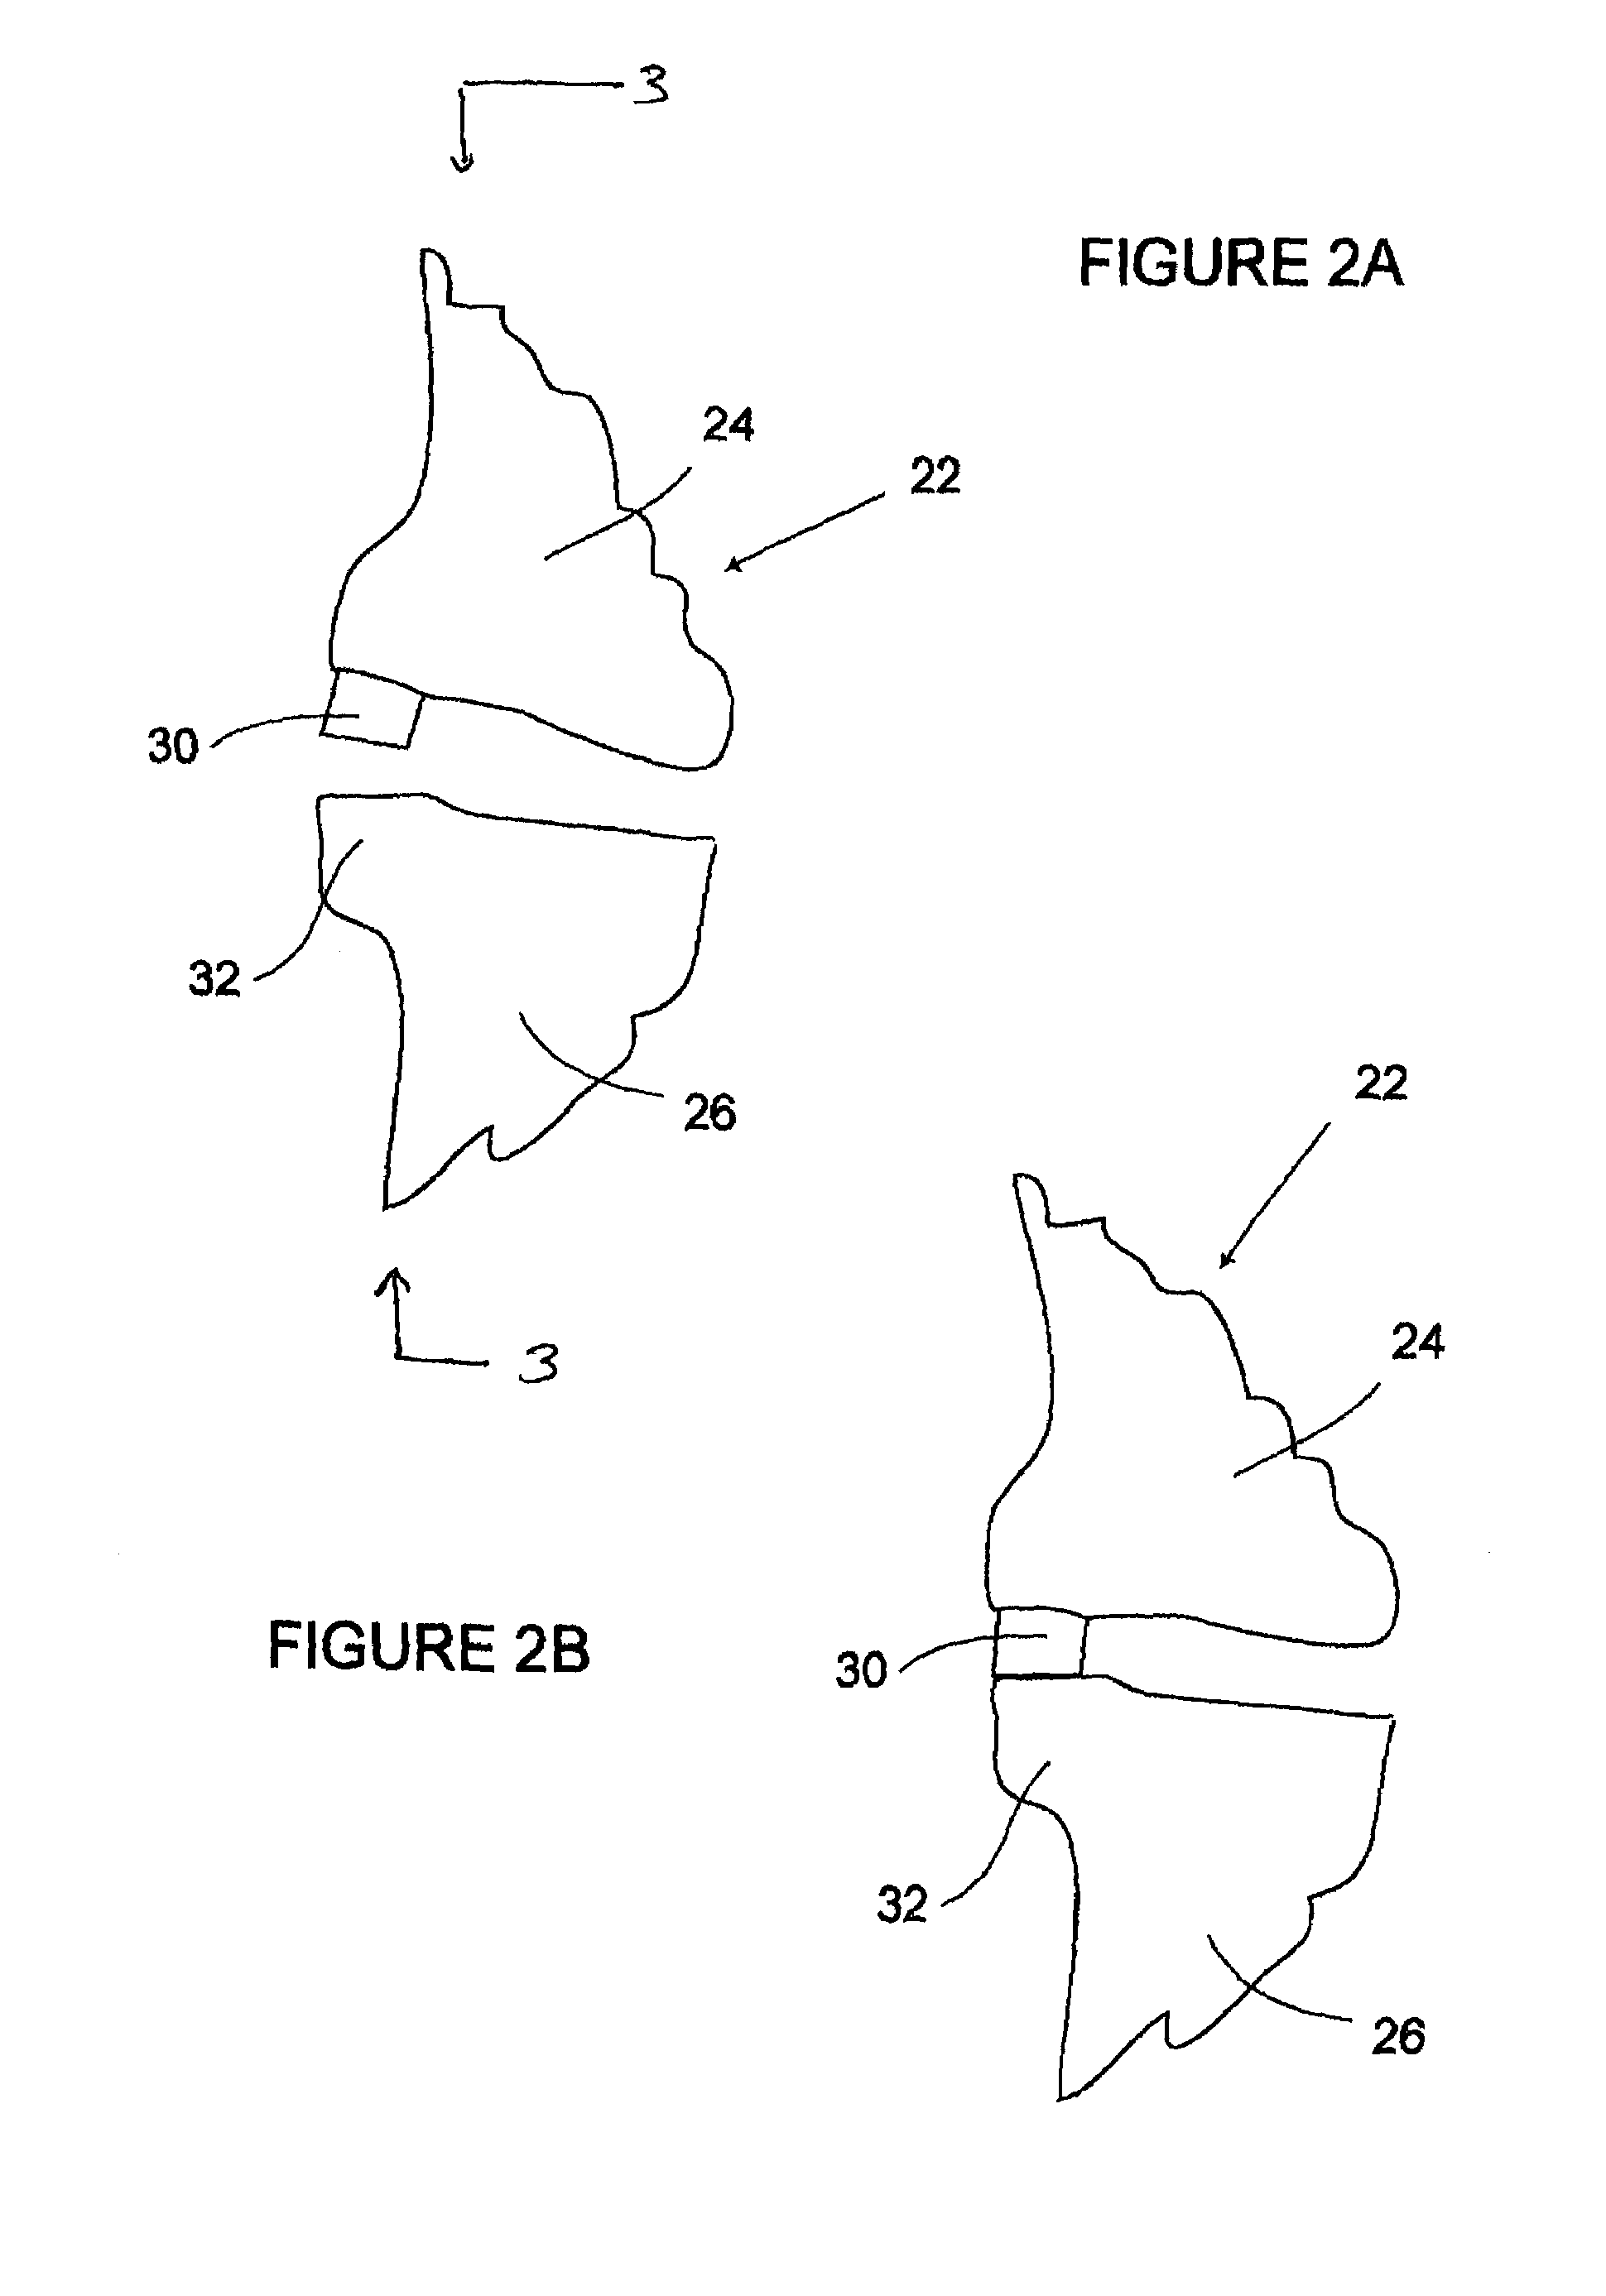 Methods of making and using an ankle-foot orthosis